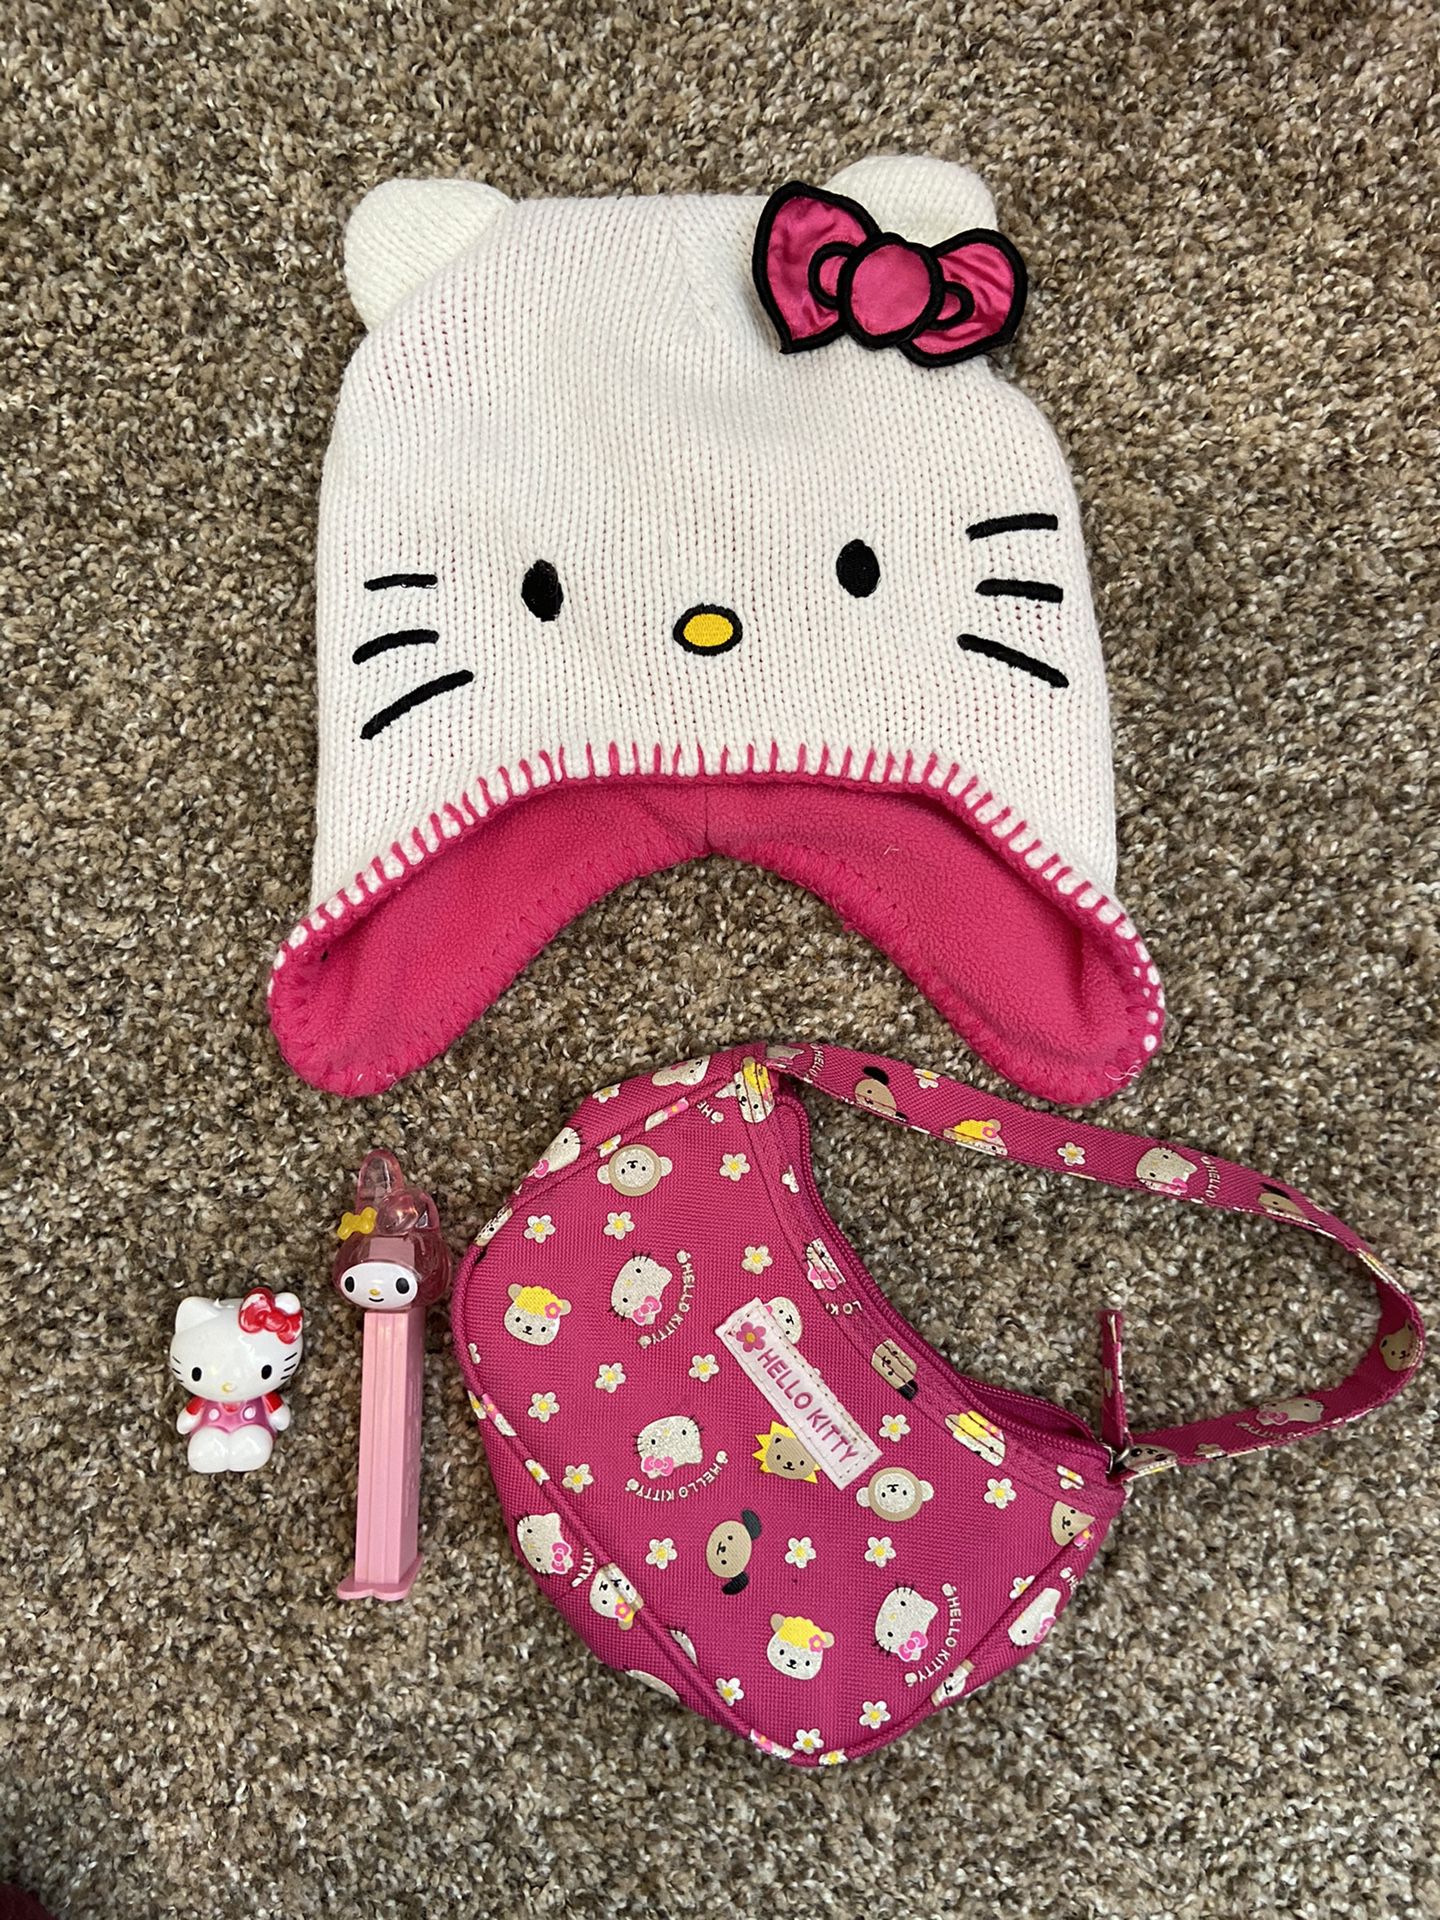 Hello Kitty kids toys, hat and purse